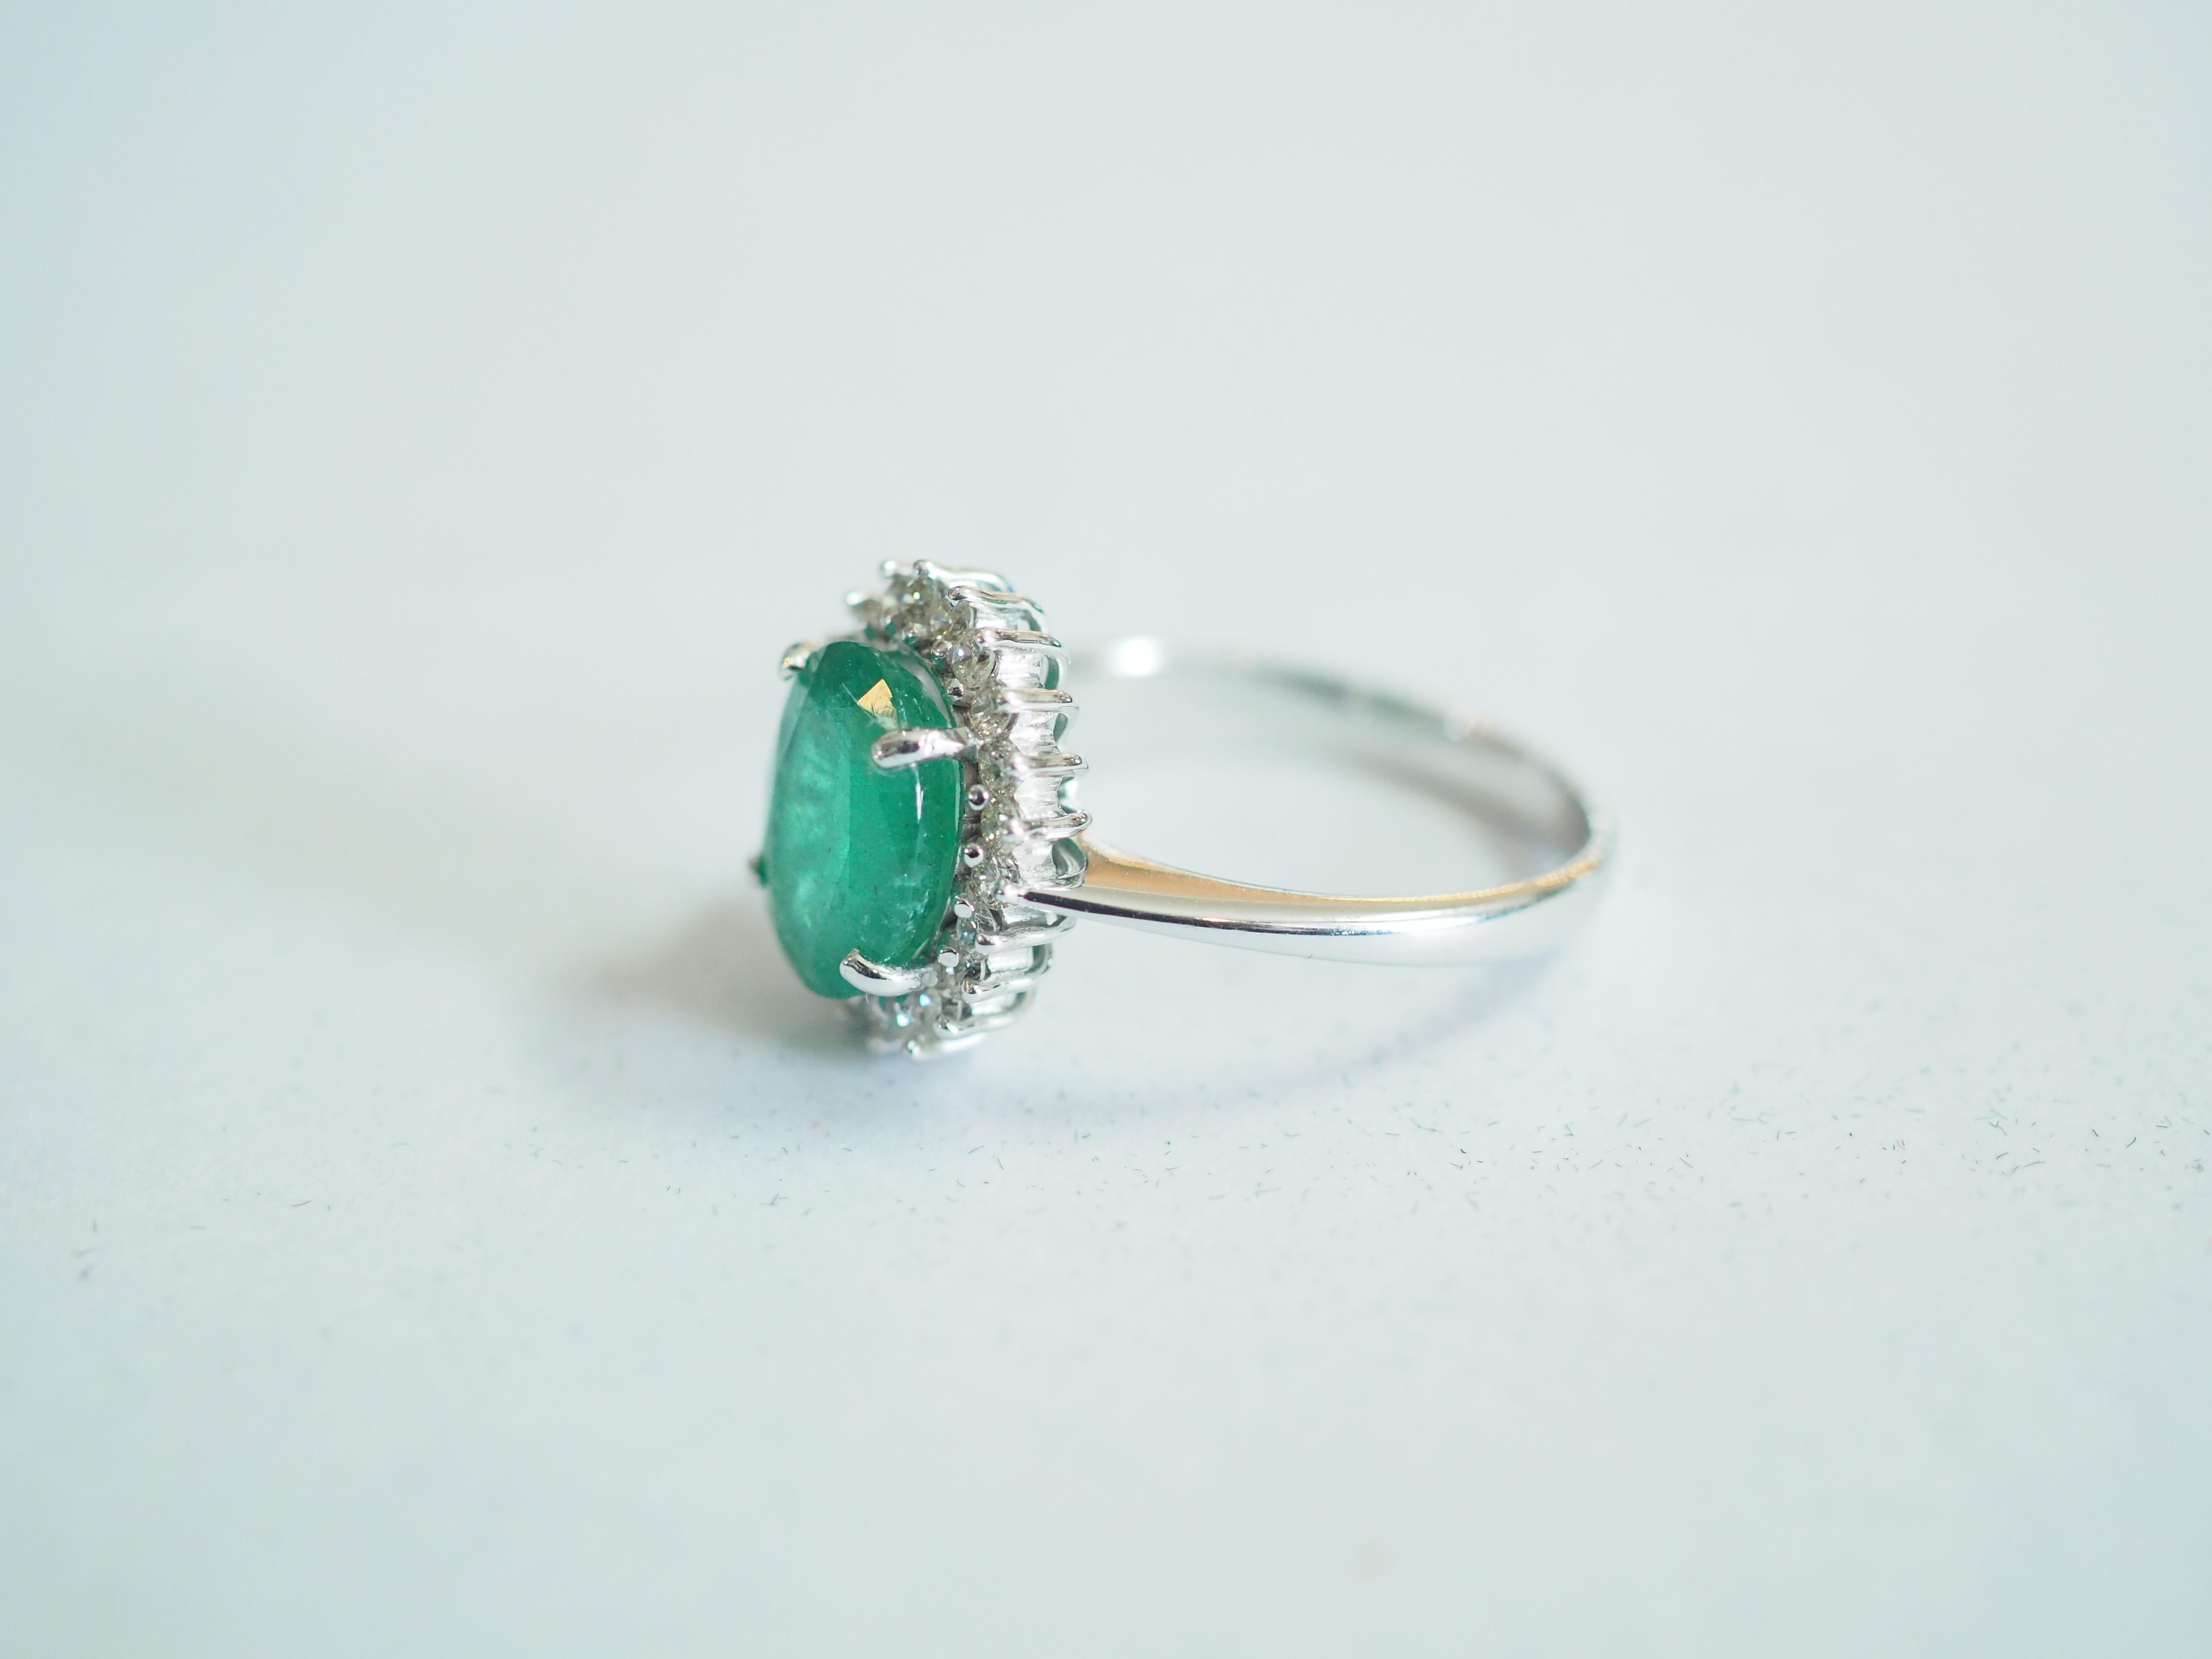 Oval Cut No Reserve- ICA 2.36ct F1 Emerald & 0.40ct Diamond 18k White Gold Cocktail Ring